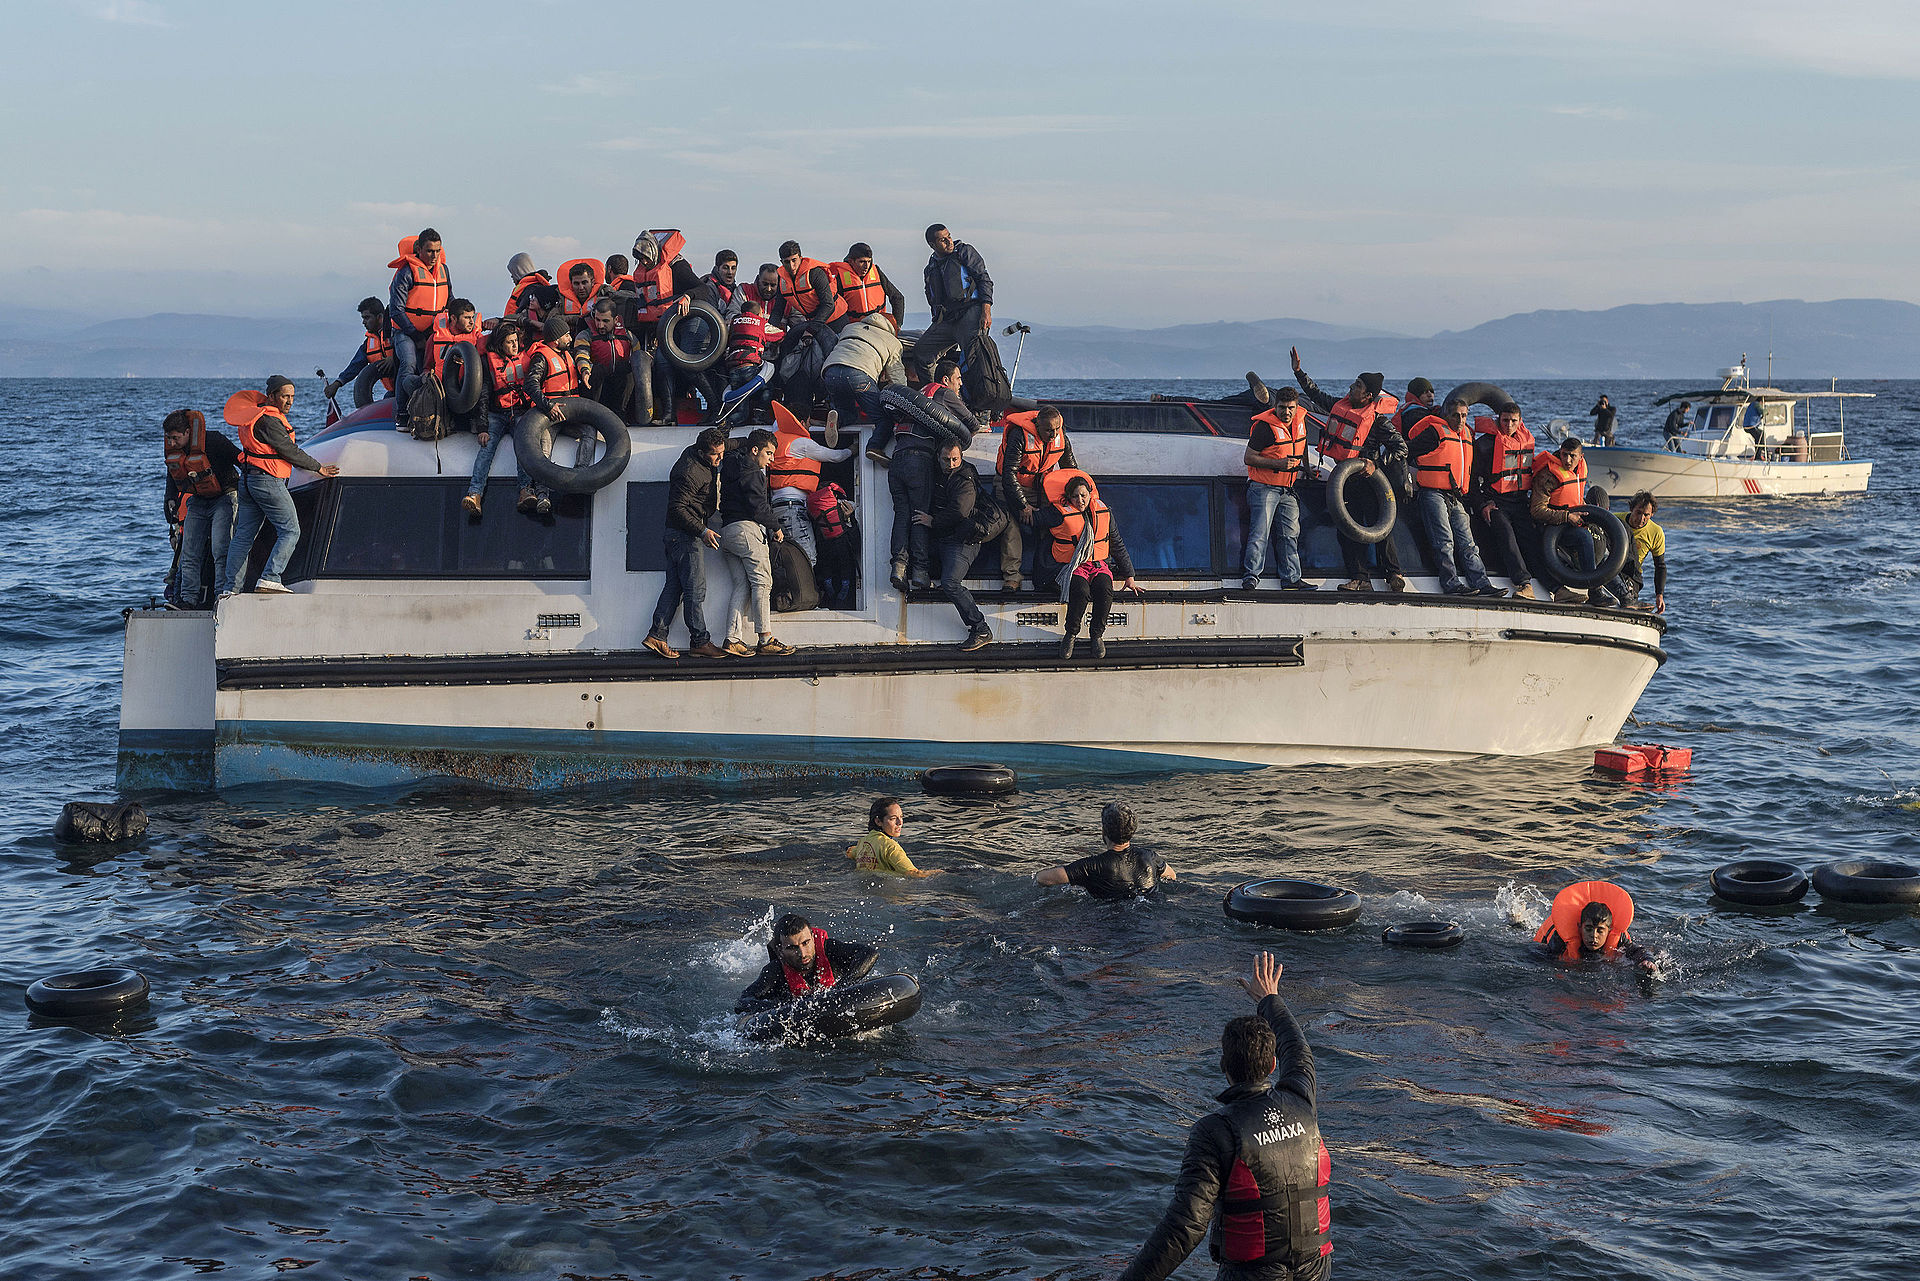 20151030_syrians_and_iraq_refugees_arrive_at_skala_sykamias_lesvos_greece_2